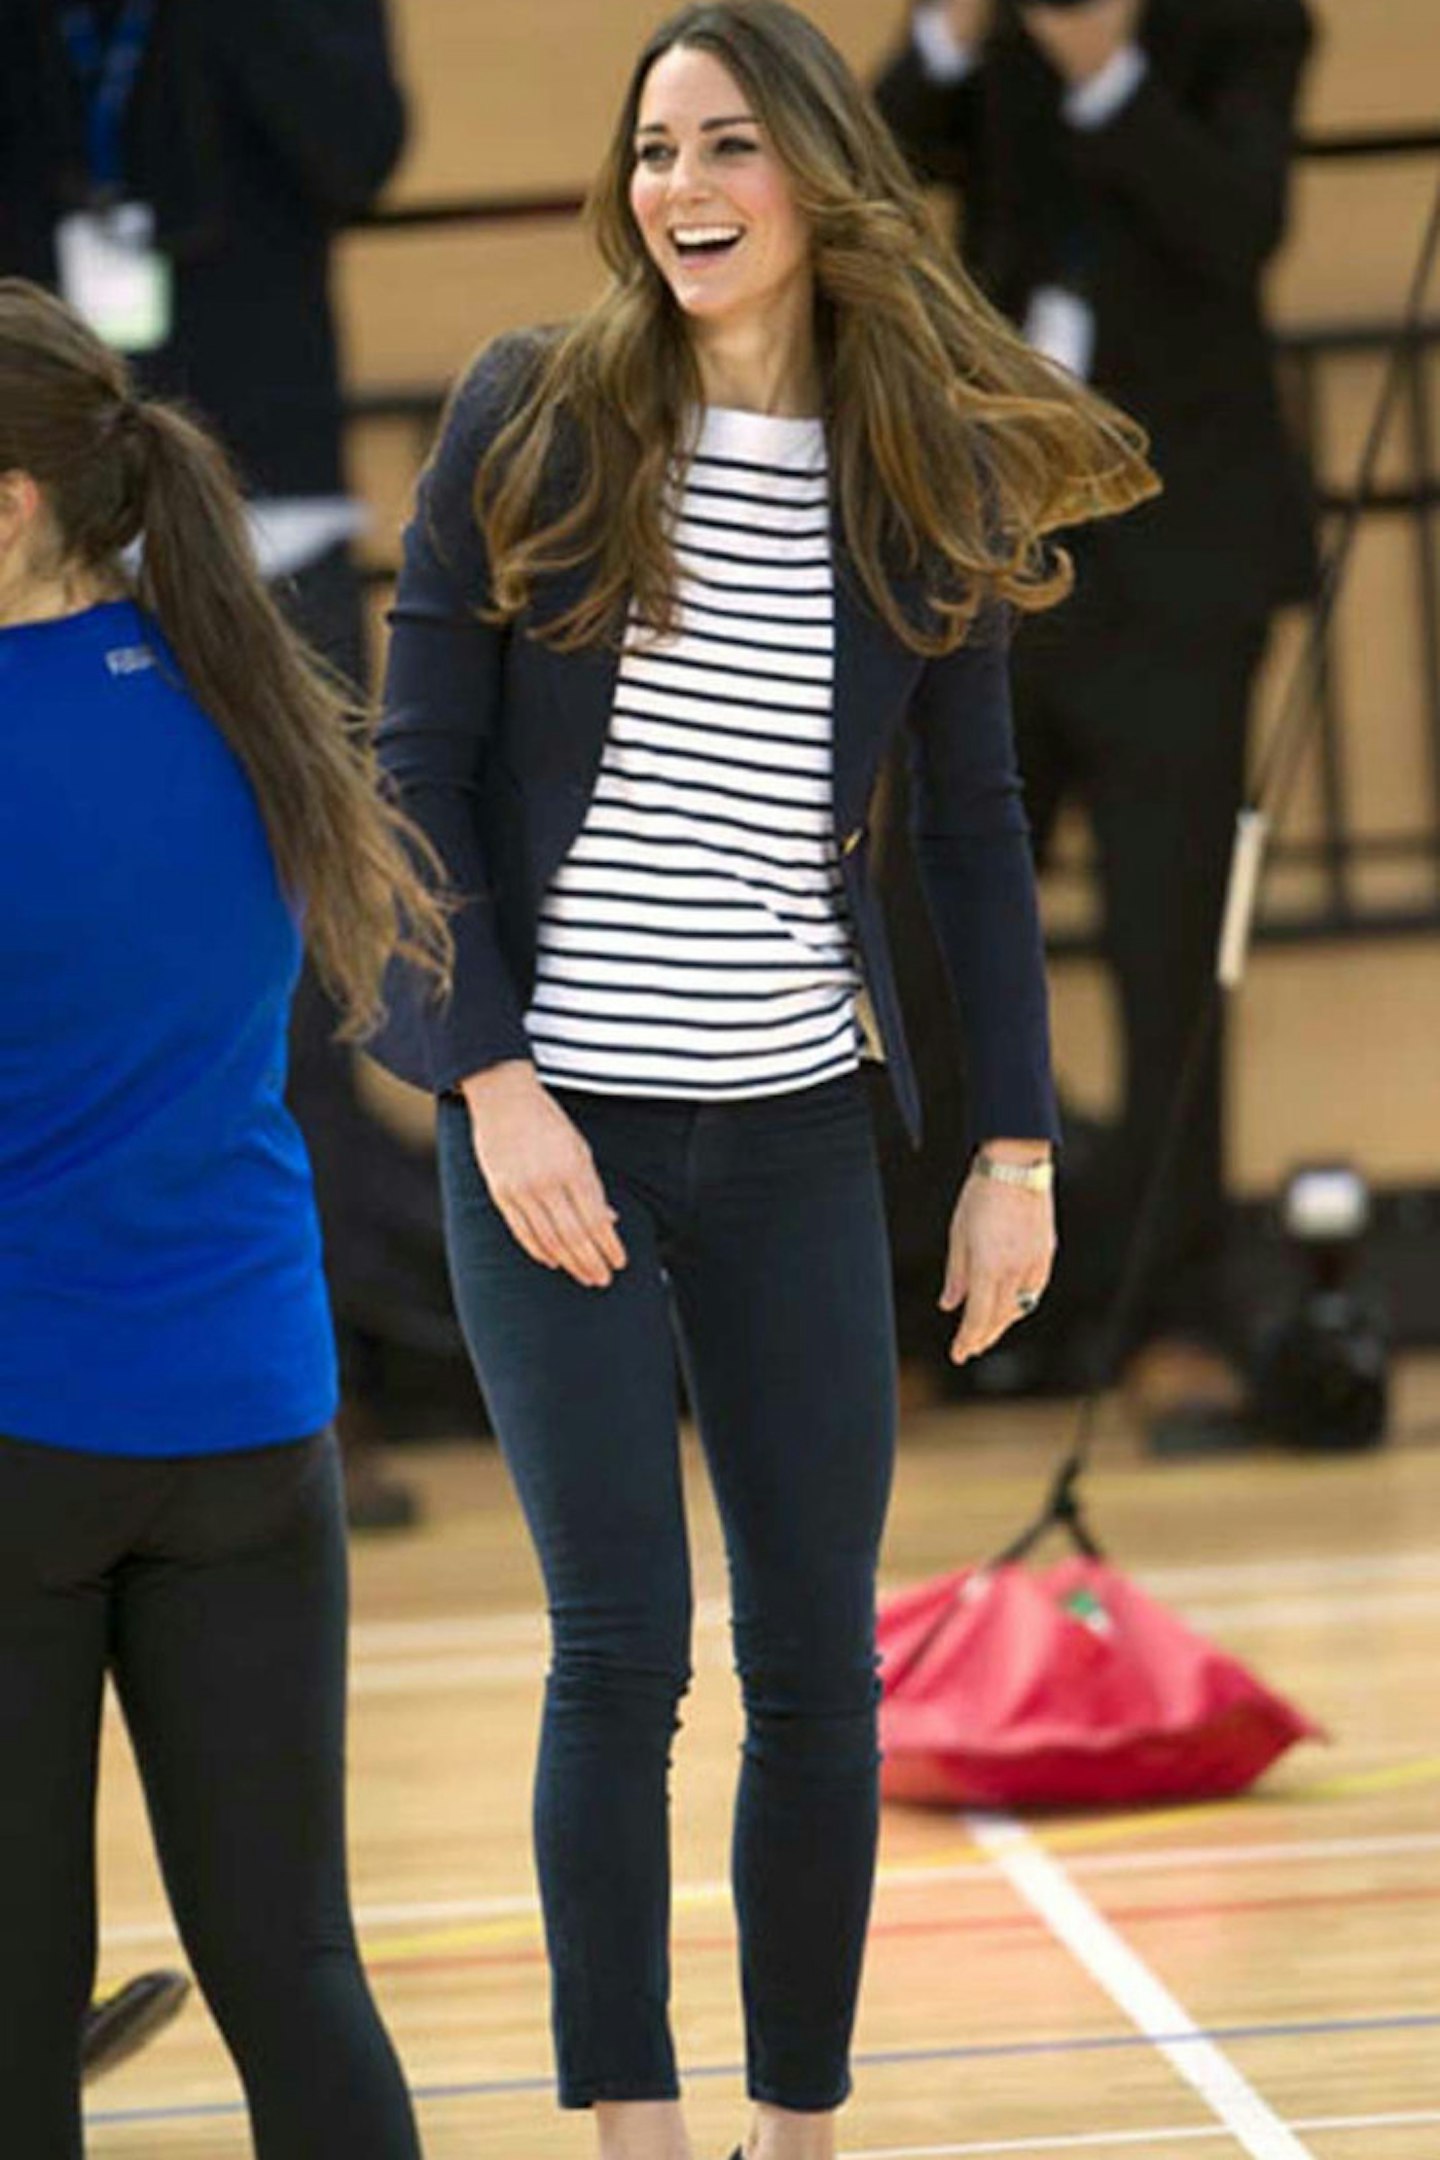 Kate Middleton in Smythe blazer, J Brand Jeans and Russell and Bromley wedges at the SportsAid Athlete Workshop at the Olympic Park, London, 18 October 2013